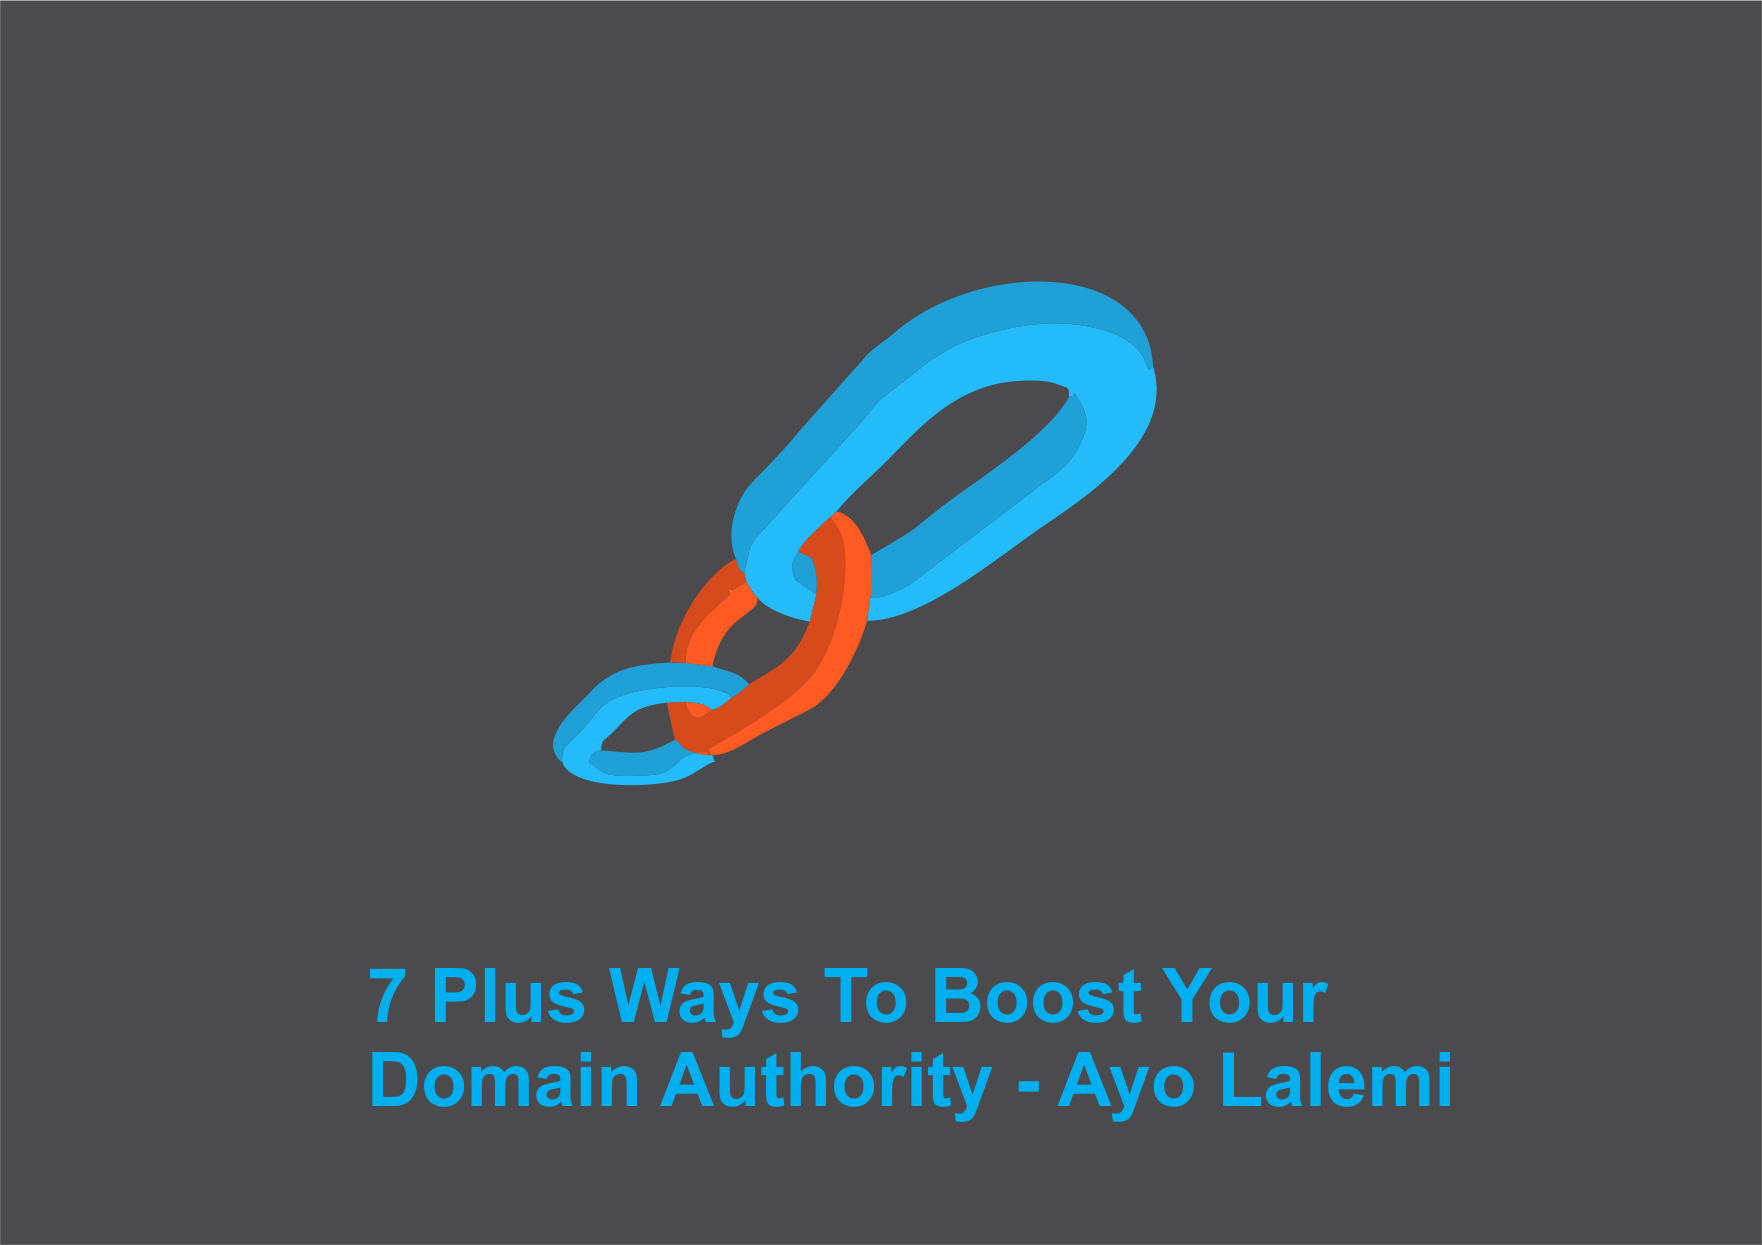 7 Plus Ways To Boost Your Domain Authority